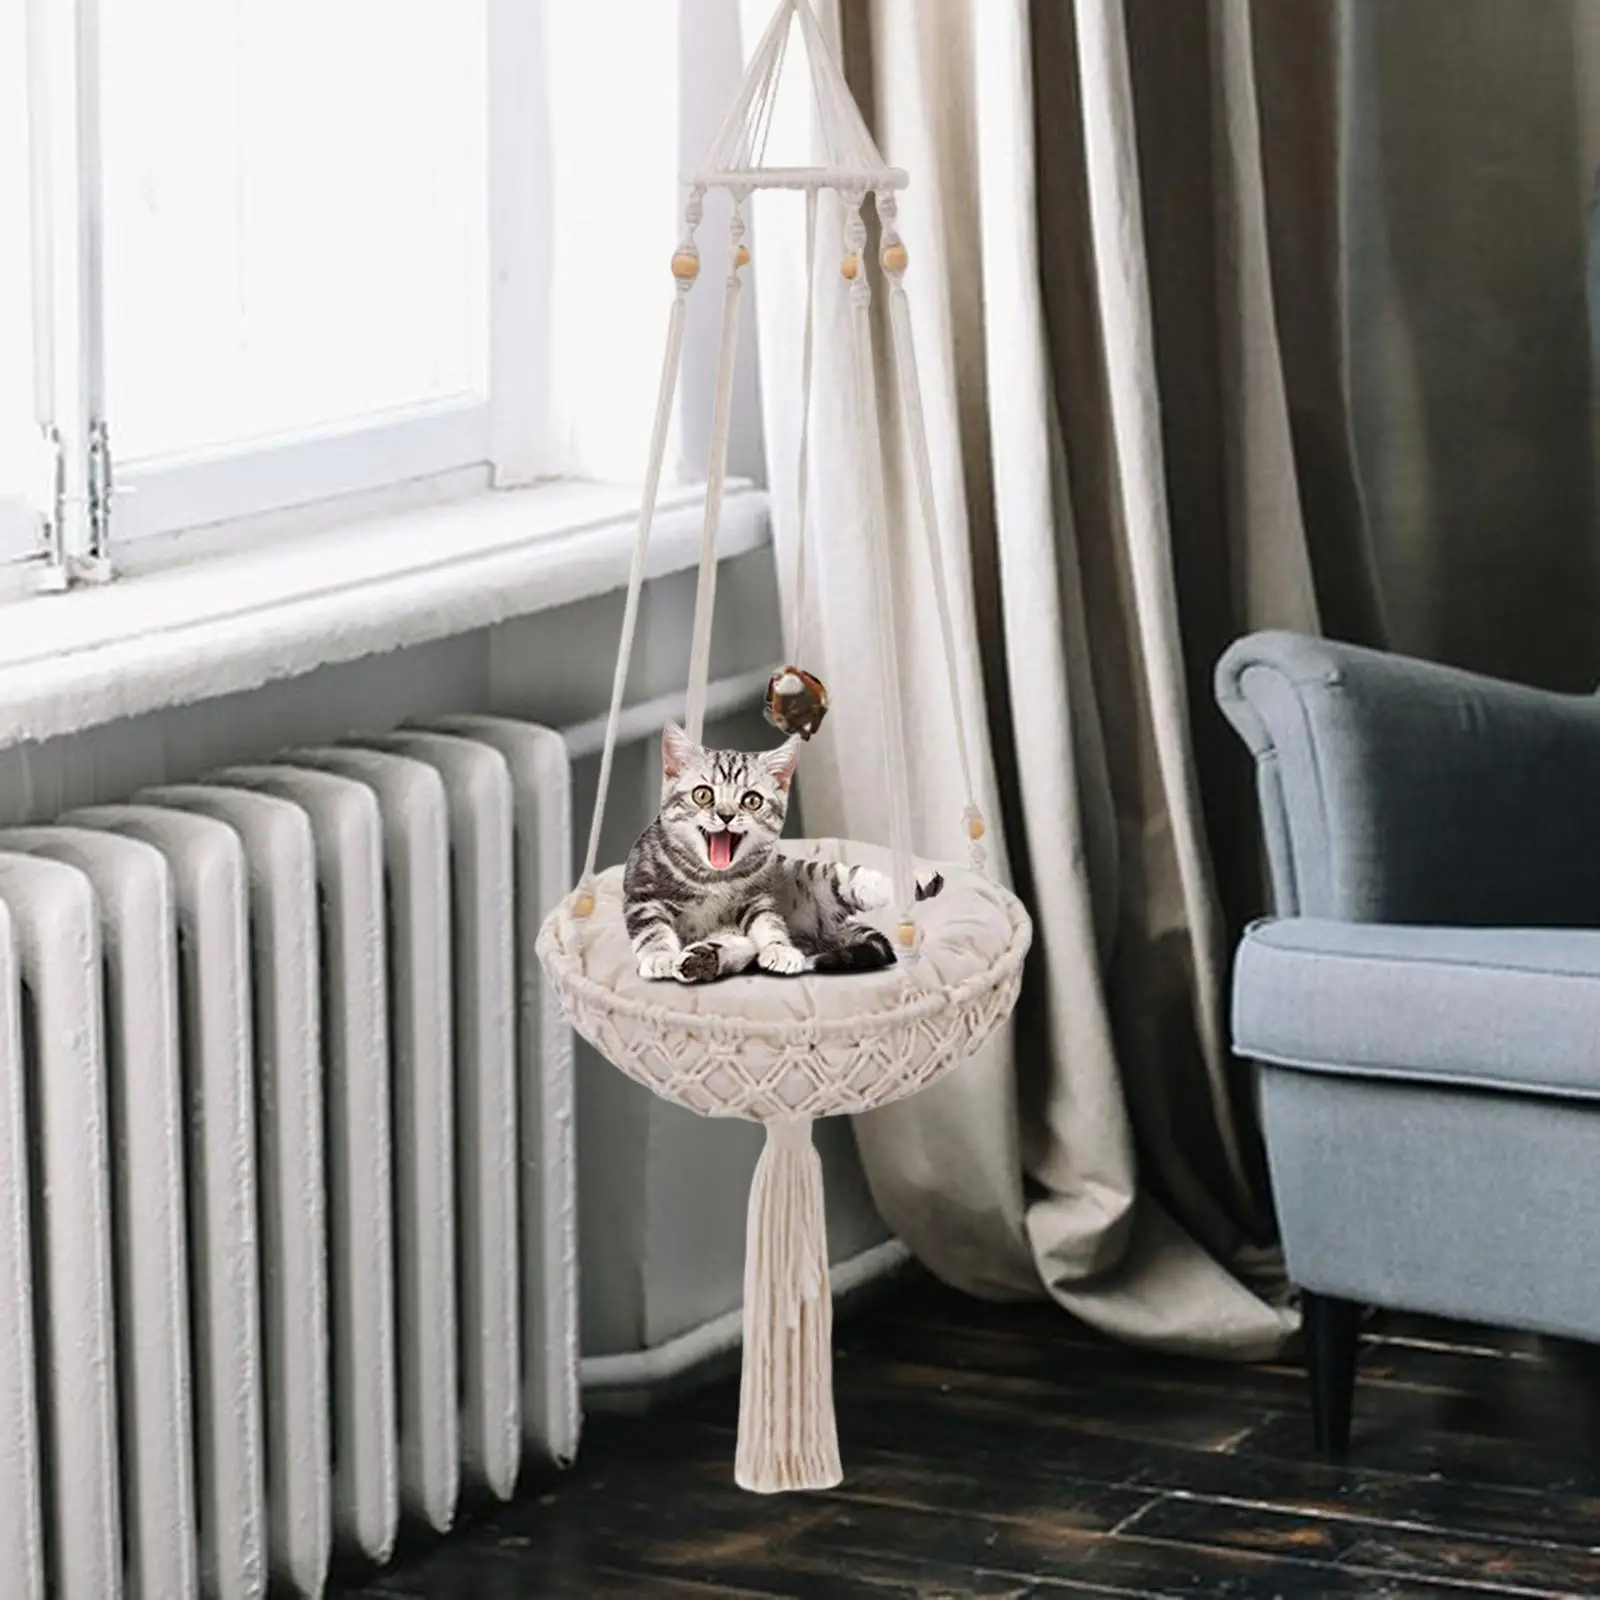 Cat Hammock Perch Bed Wall Hanging Handwoven Mat Toy for Sleeping Basking